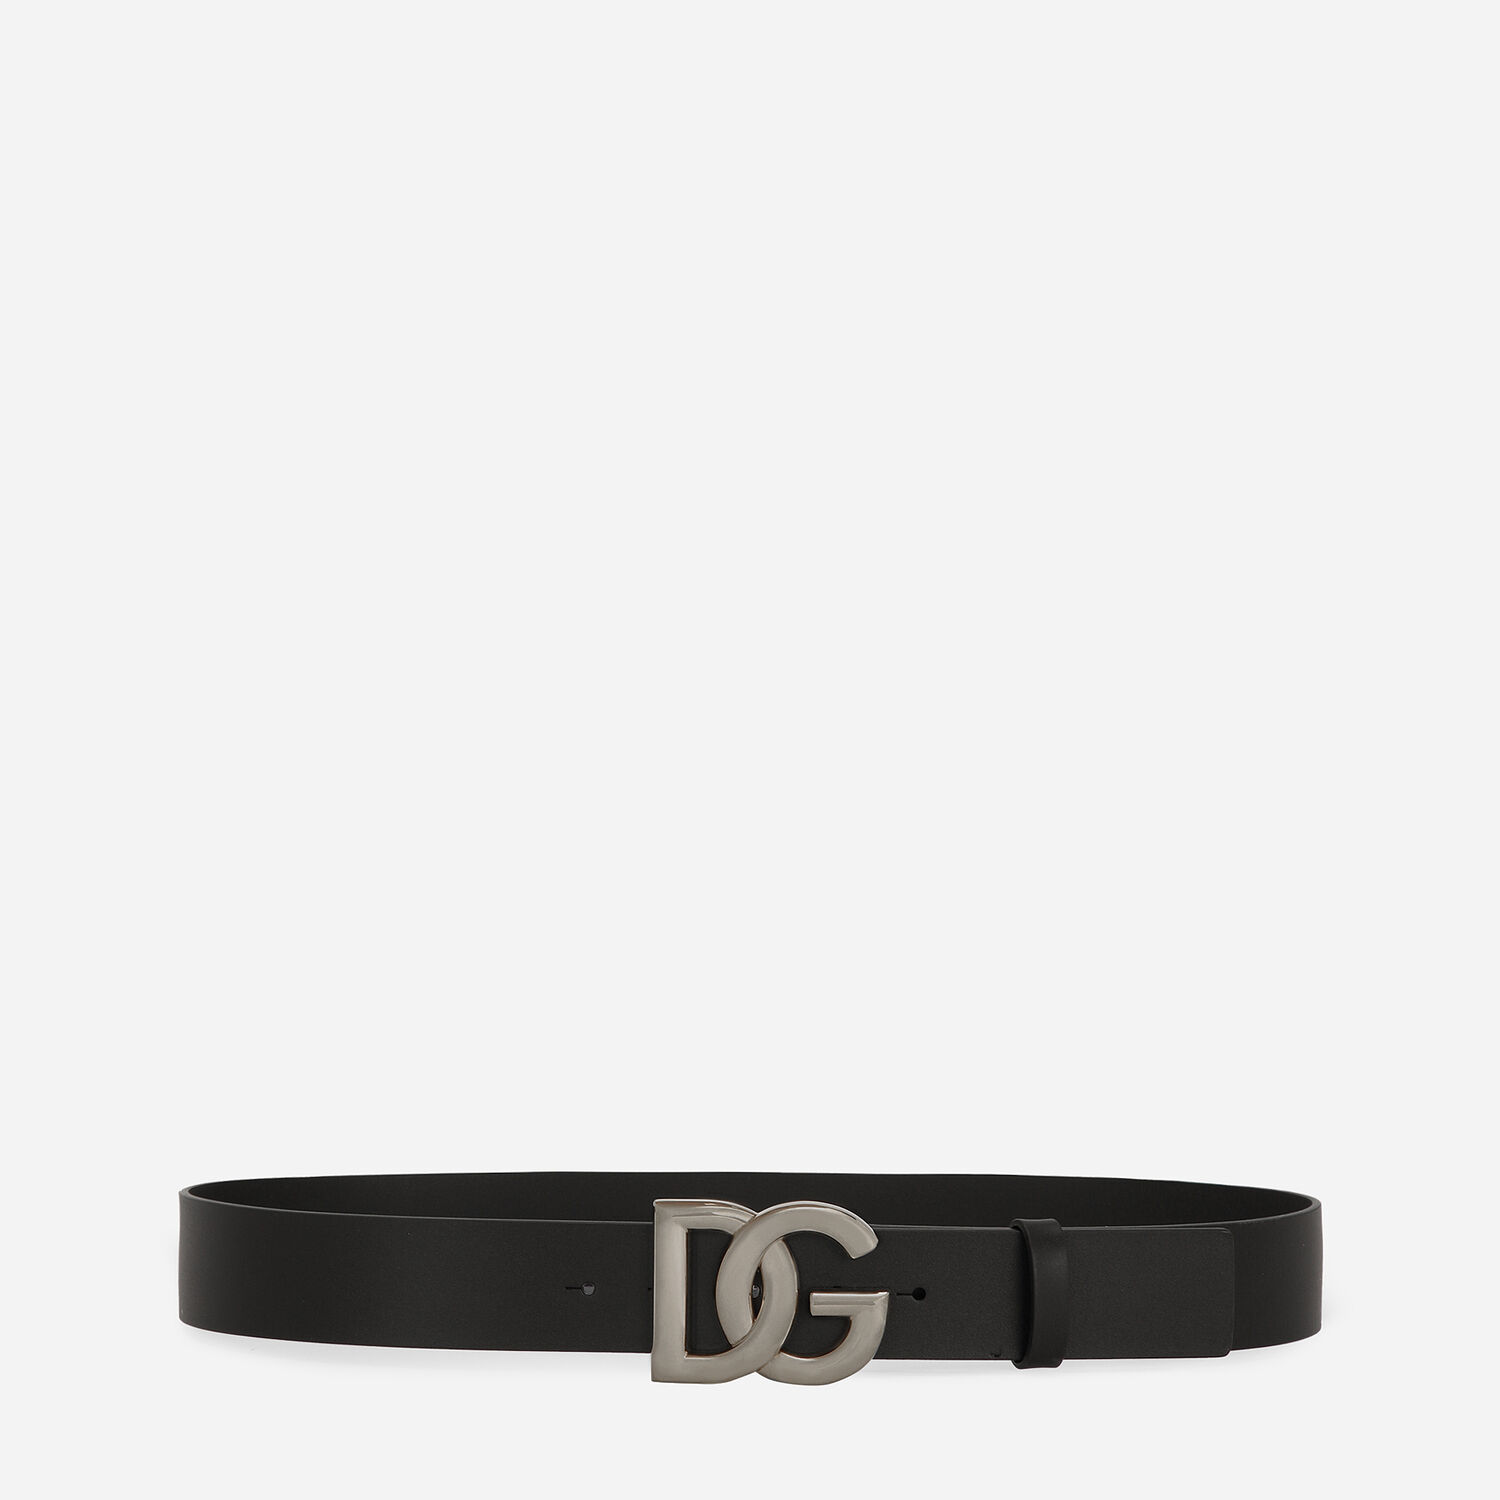 Lux leather belt with crossover | in for US logo Dolce&Gabbana® Black buckle DG